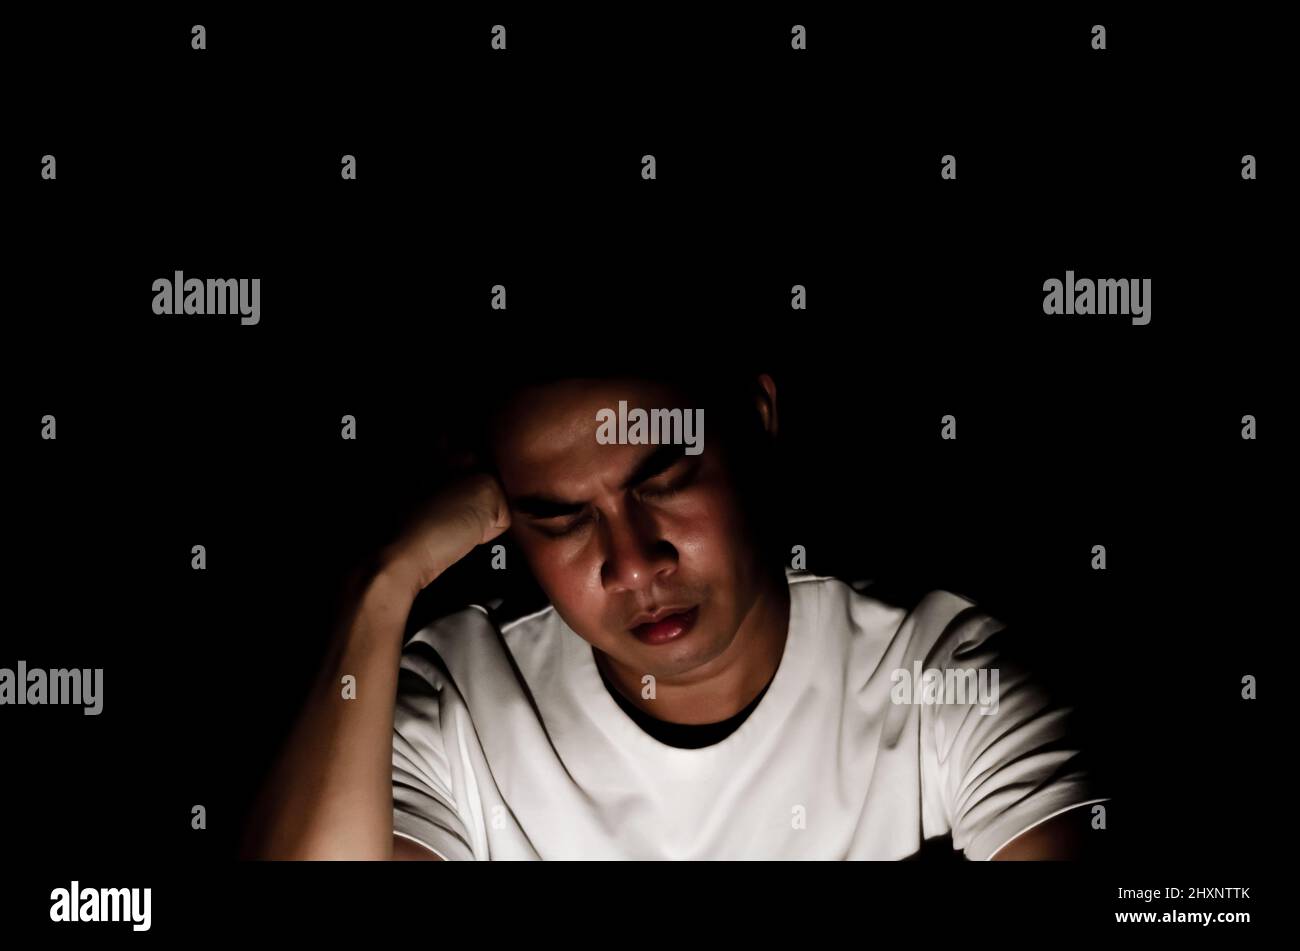 Asian miserable depressed man sitting alone in dark background. Depression and mental health concept. Stock Photo